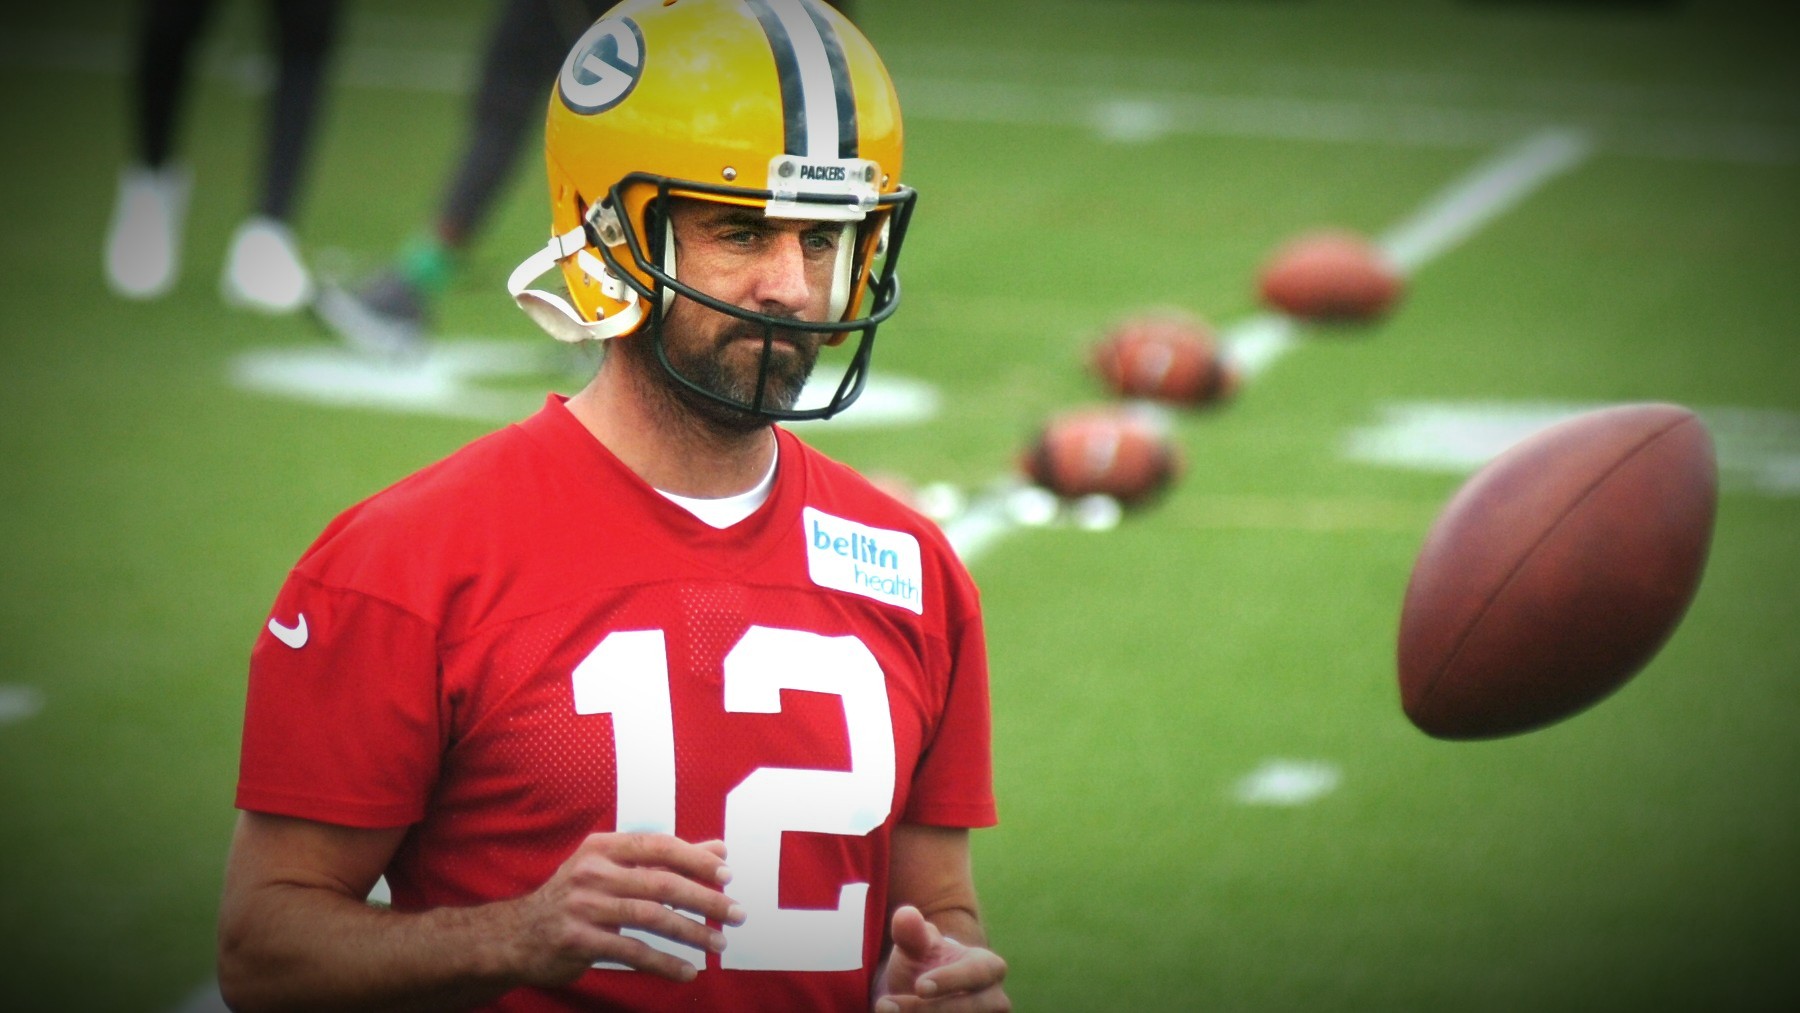 Although still not official, there are more signs pointing to a return to the Green Bay Packers of four-time NFL MVP Aaron Rodgers.